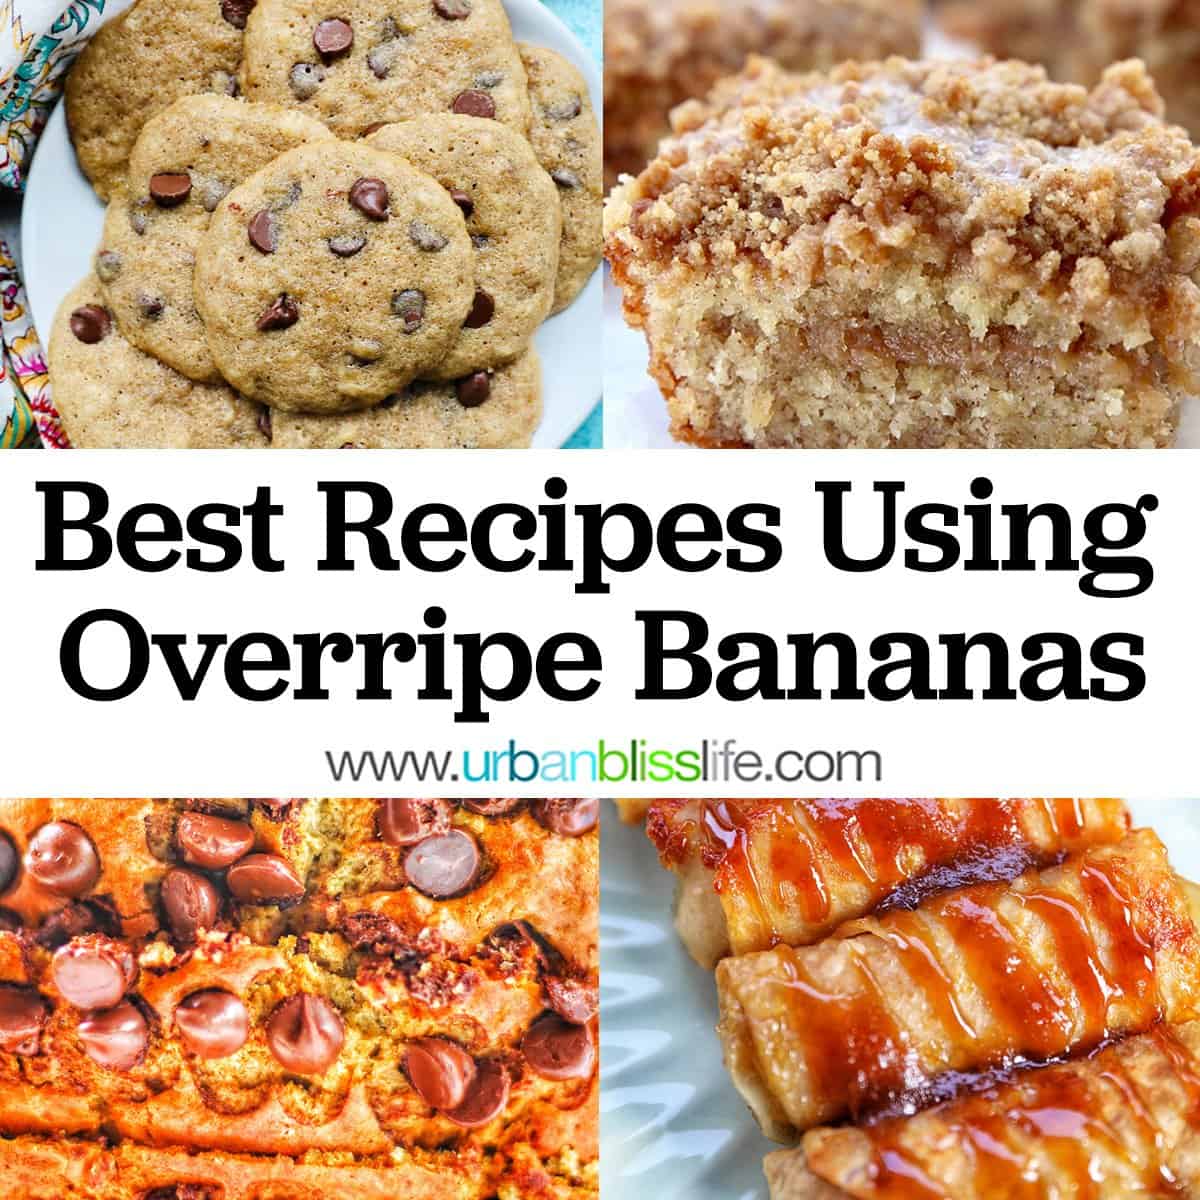 photo of four baked goods recipes using overripe bananas with title text.